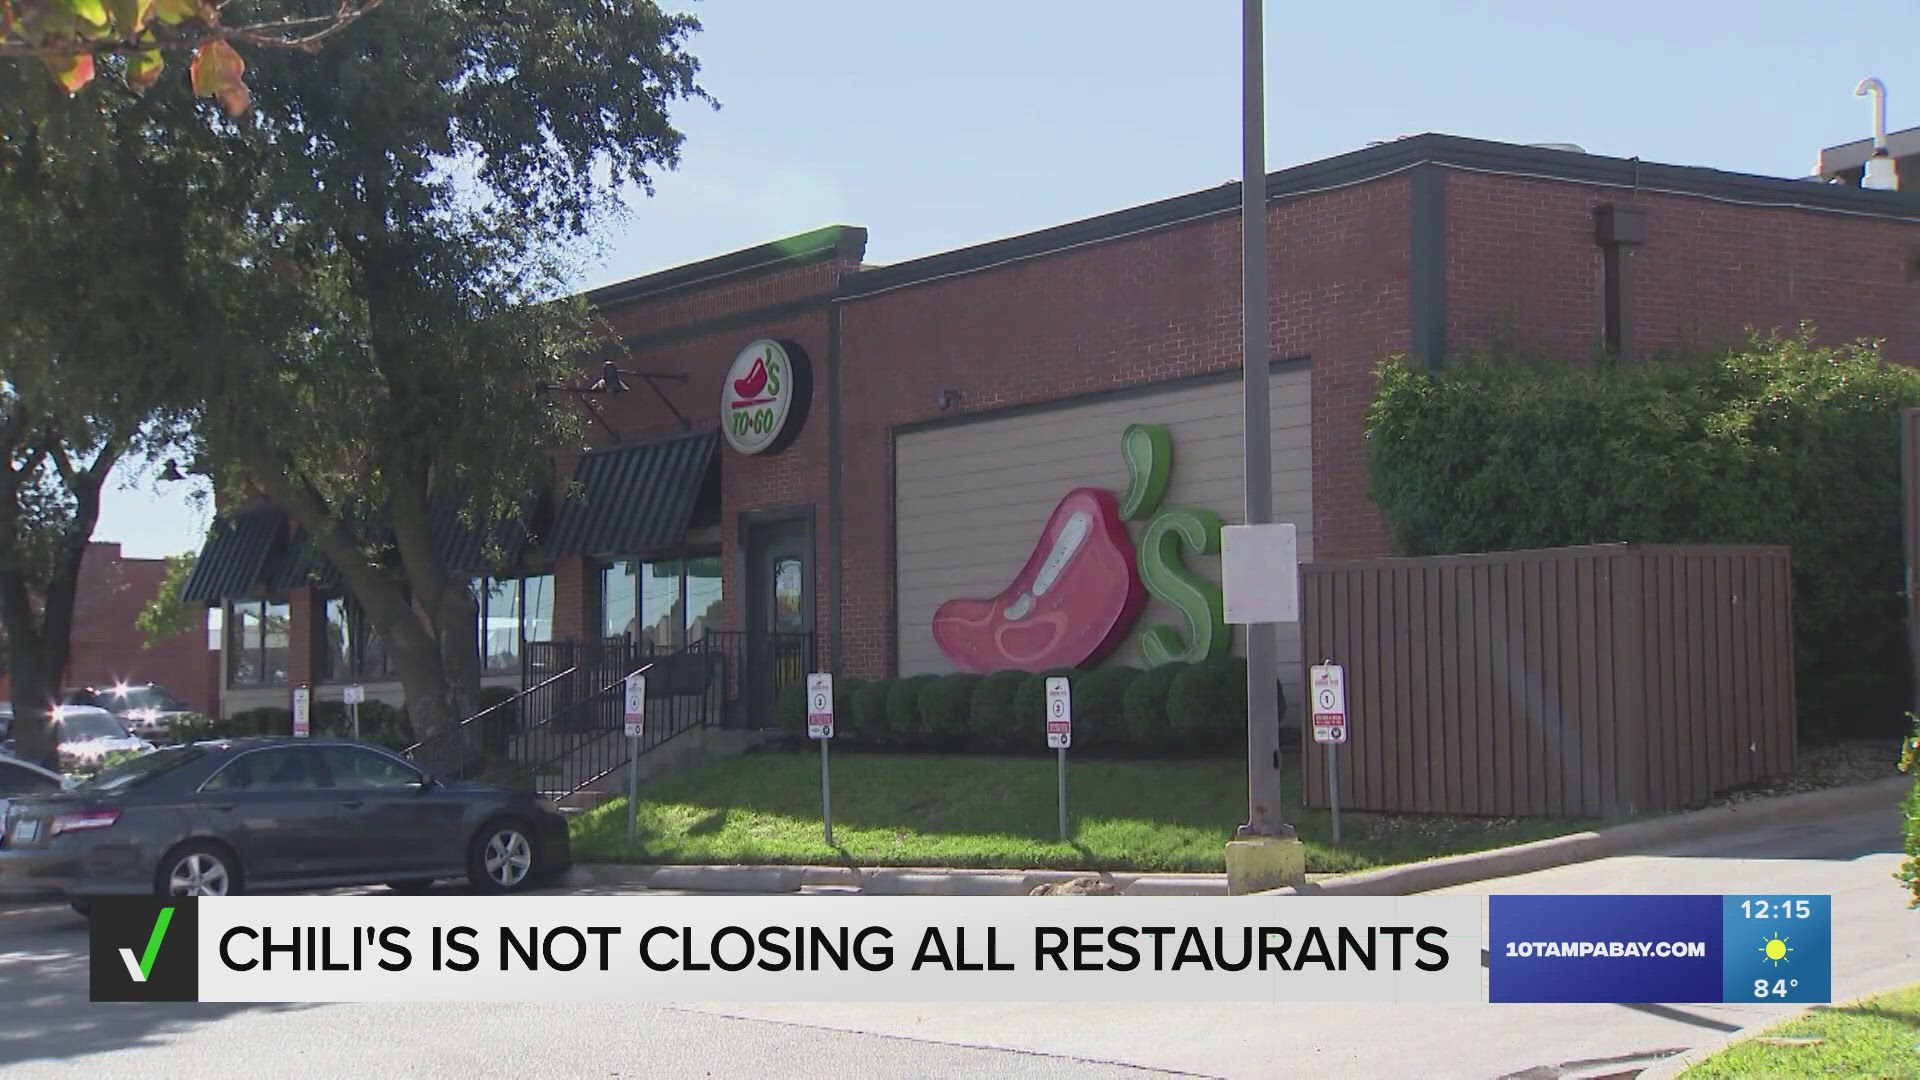 Viral posts with millions of views claim the chain is shutting down nationwide. But, the restaurant's parent company asserts Chili's isn't going anywhere.